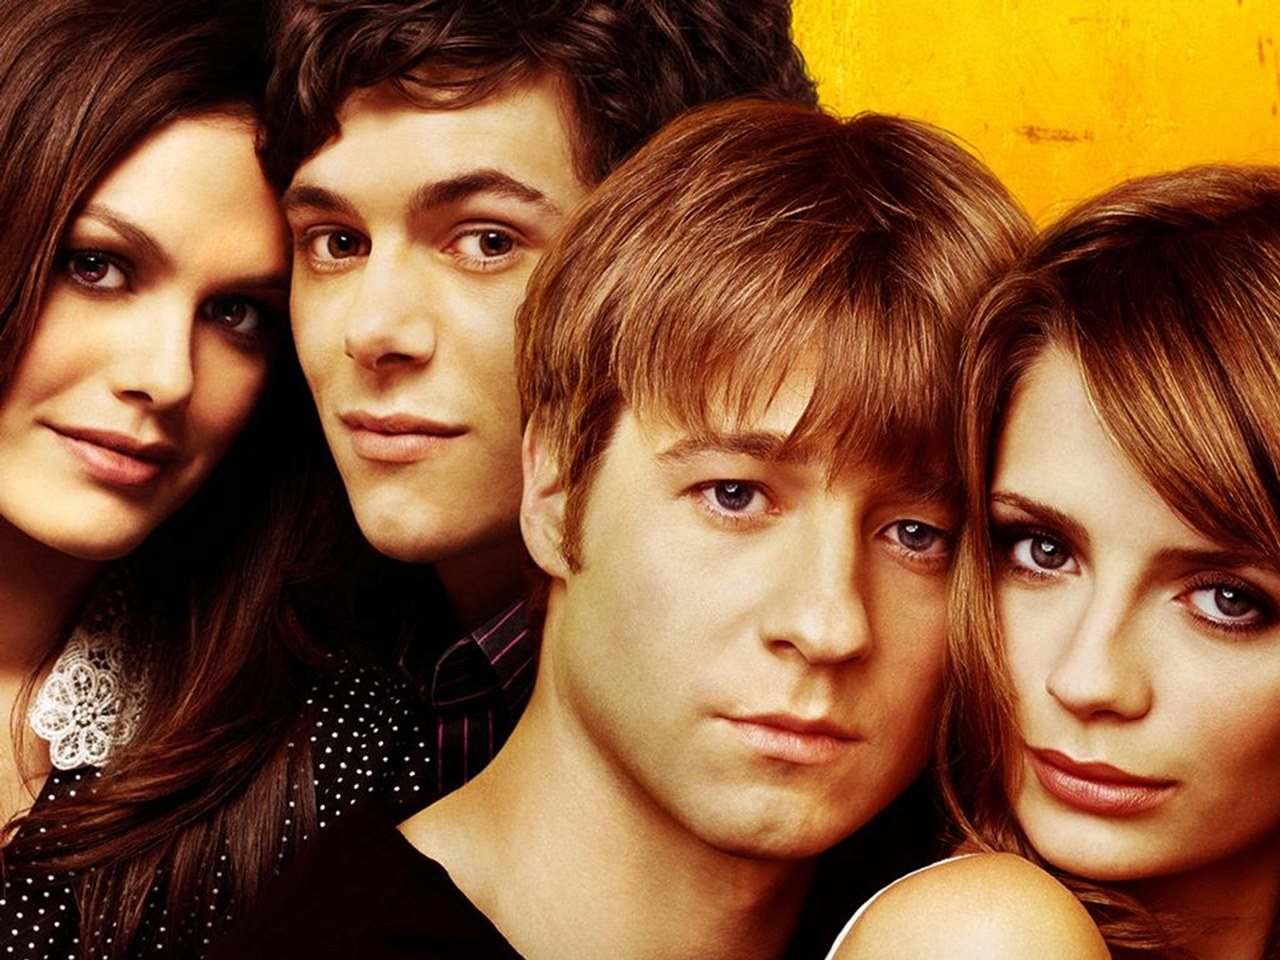 17 Times The OC Was Way Too Real to Handle